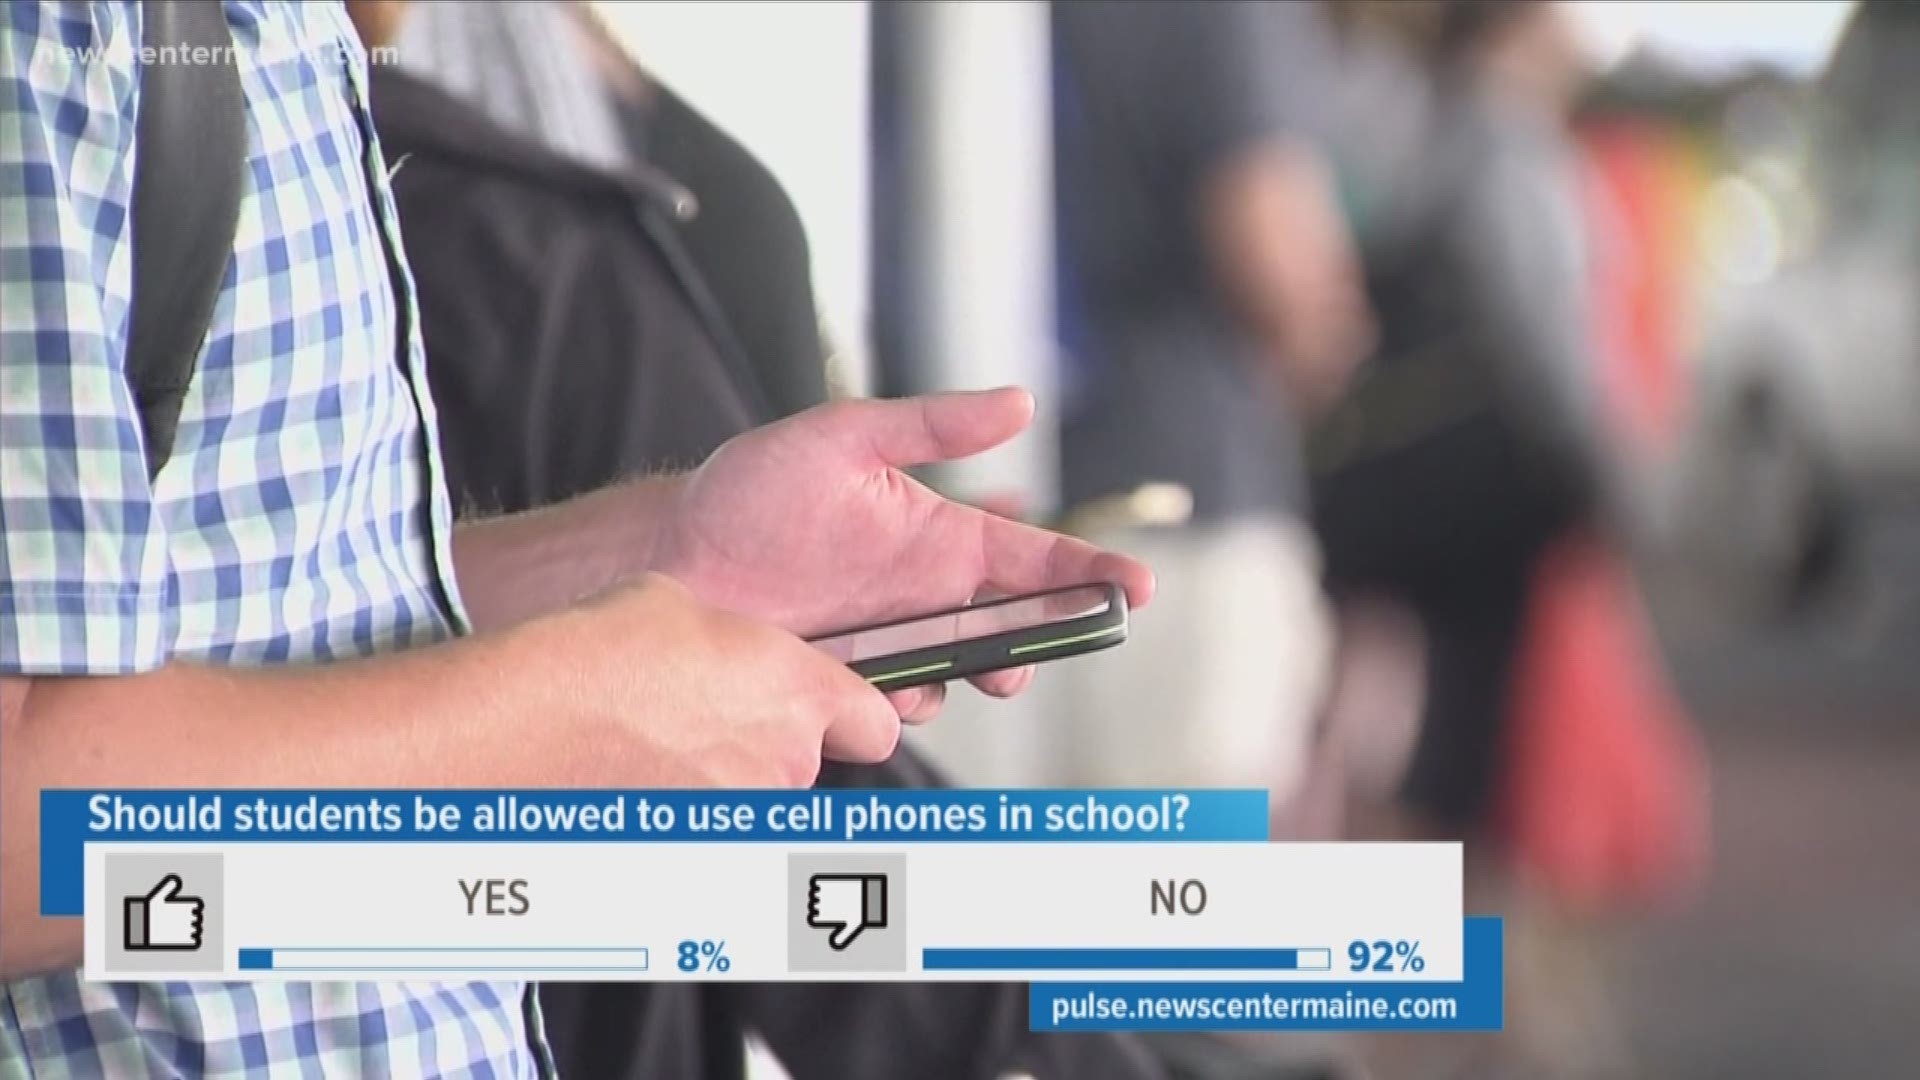 A proposed bill in Maine's legislature would ban cell phone use in schools to improve students' concentration on education.